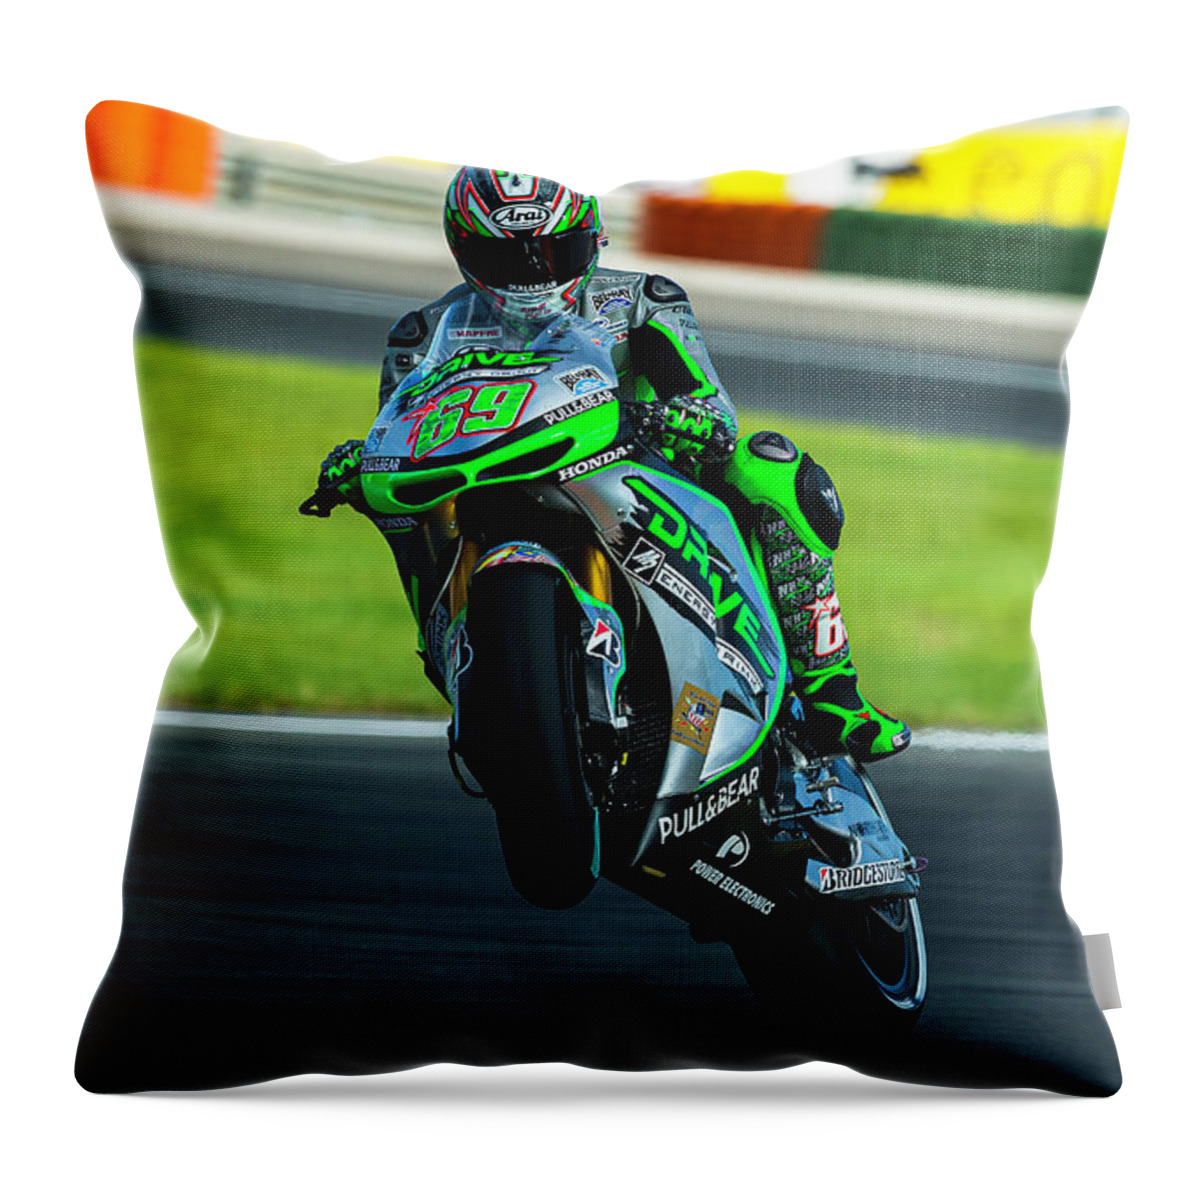 Nicky Hayden Throw Pillow featuring the photograph Nicky Hayden Valencia 2014 by Tony Goldsmith